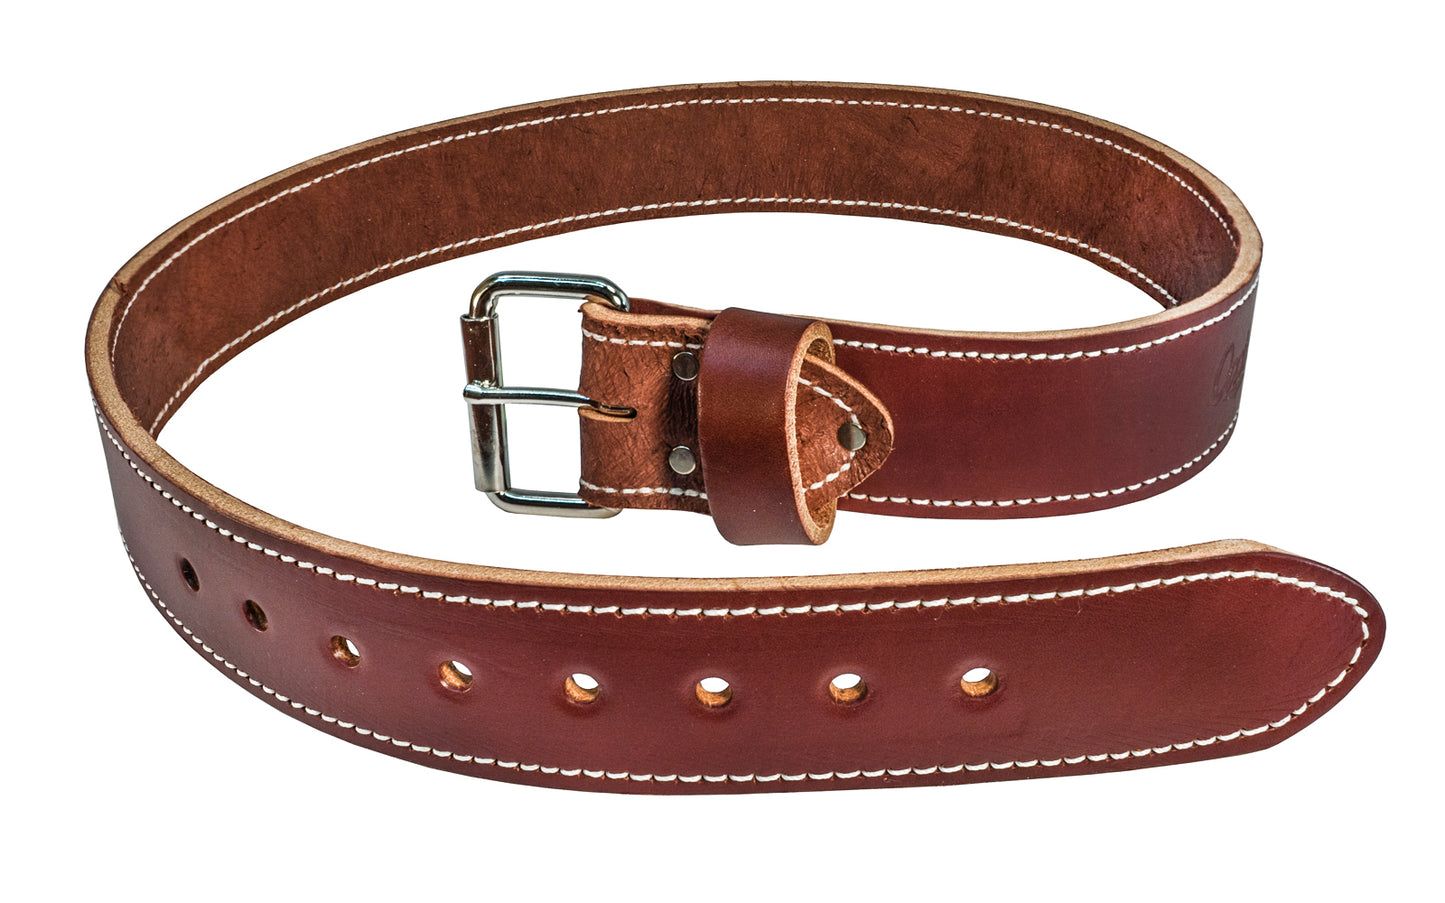 Occidental Leather Extra Extra Large 2" Leather Work Belt ~ Model 5002XXL - Made of genuine leather - Made in USA  - 759244178708 - XXL Occidental Belt - Leather Work Belt - 2" wide - Large Buckle - Quality 12-14 oz bridle leather - Edge stitched for quality, appearance & strength - 5002 XXL - 49" Mid range - 56" Length